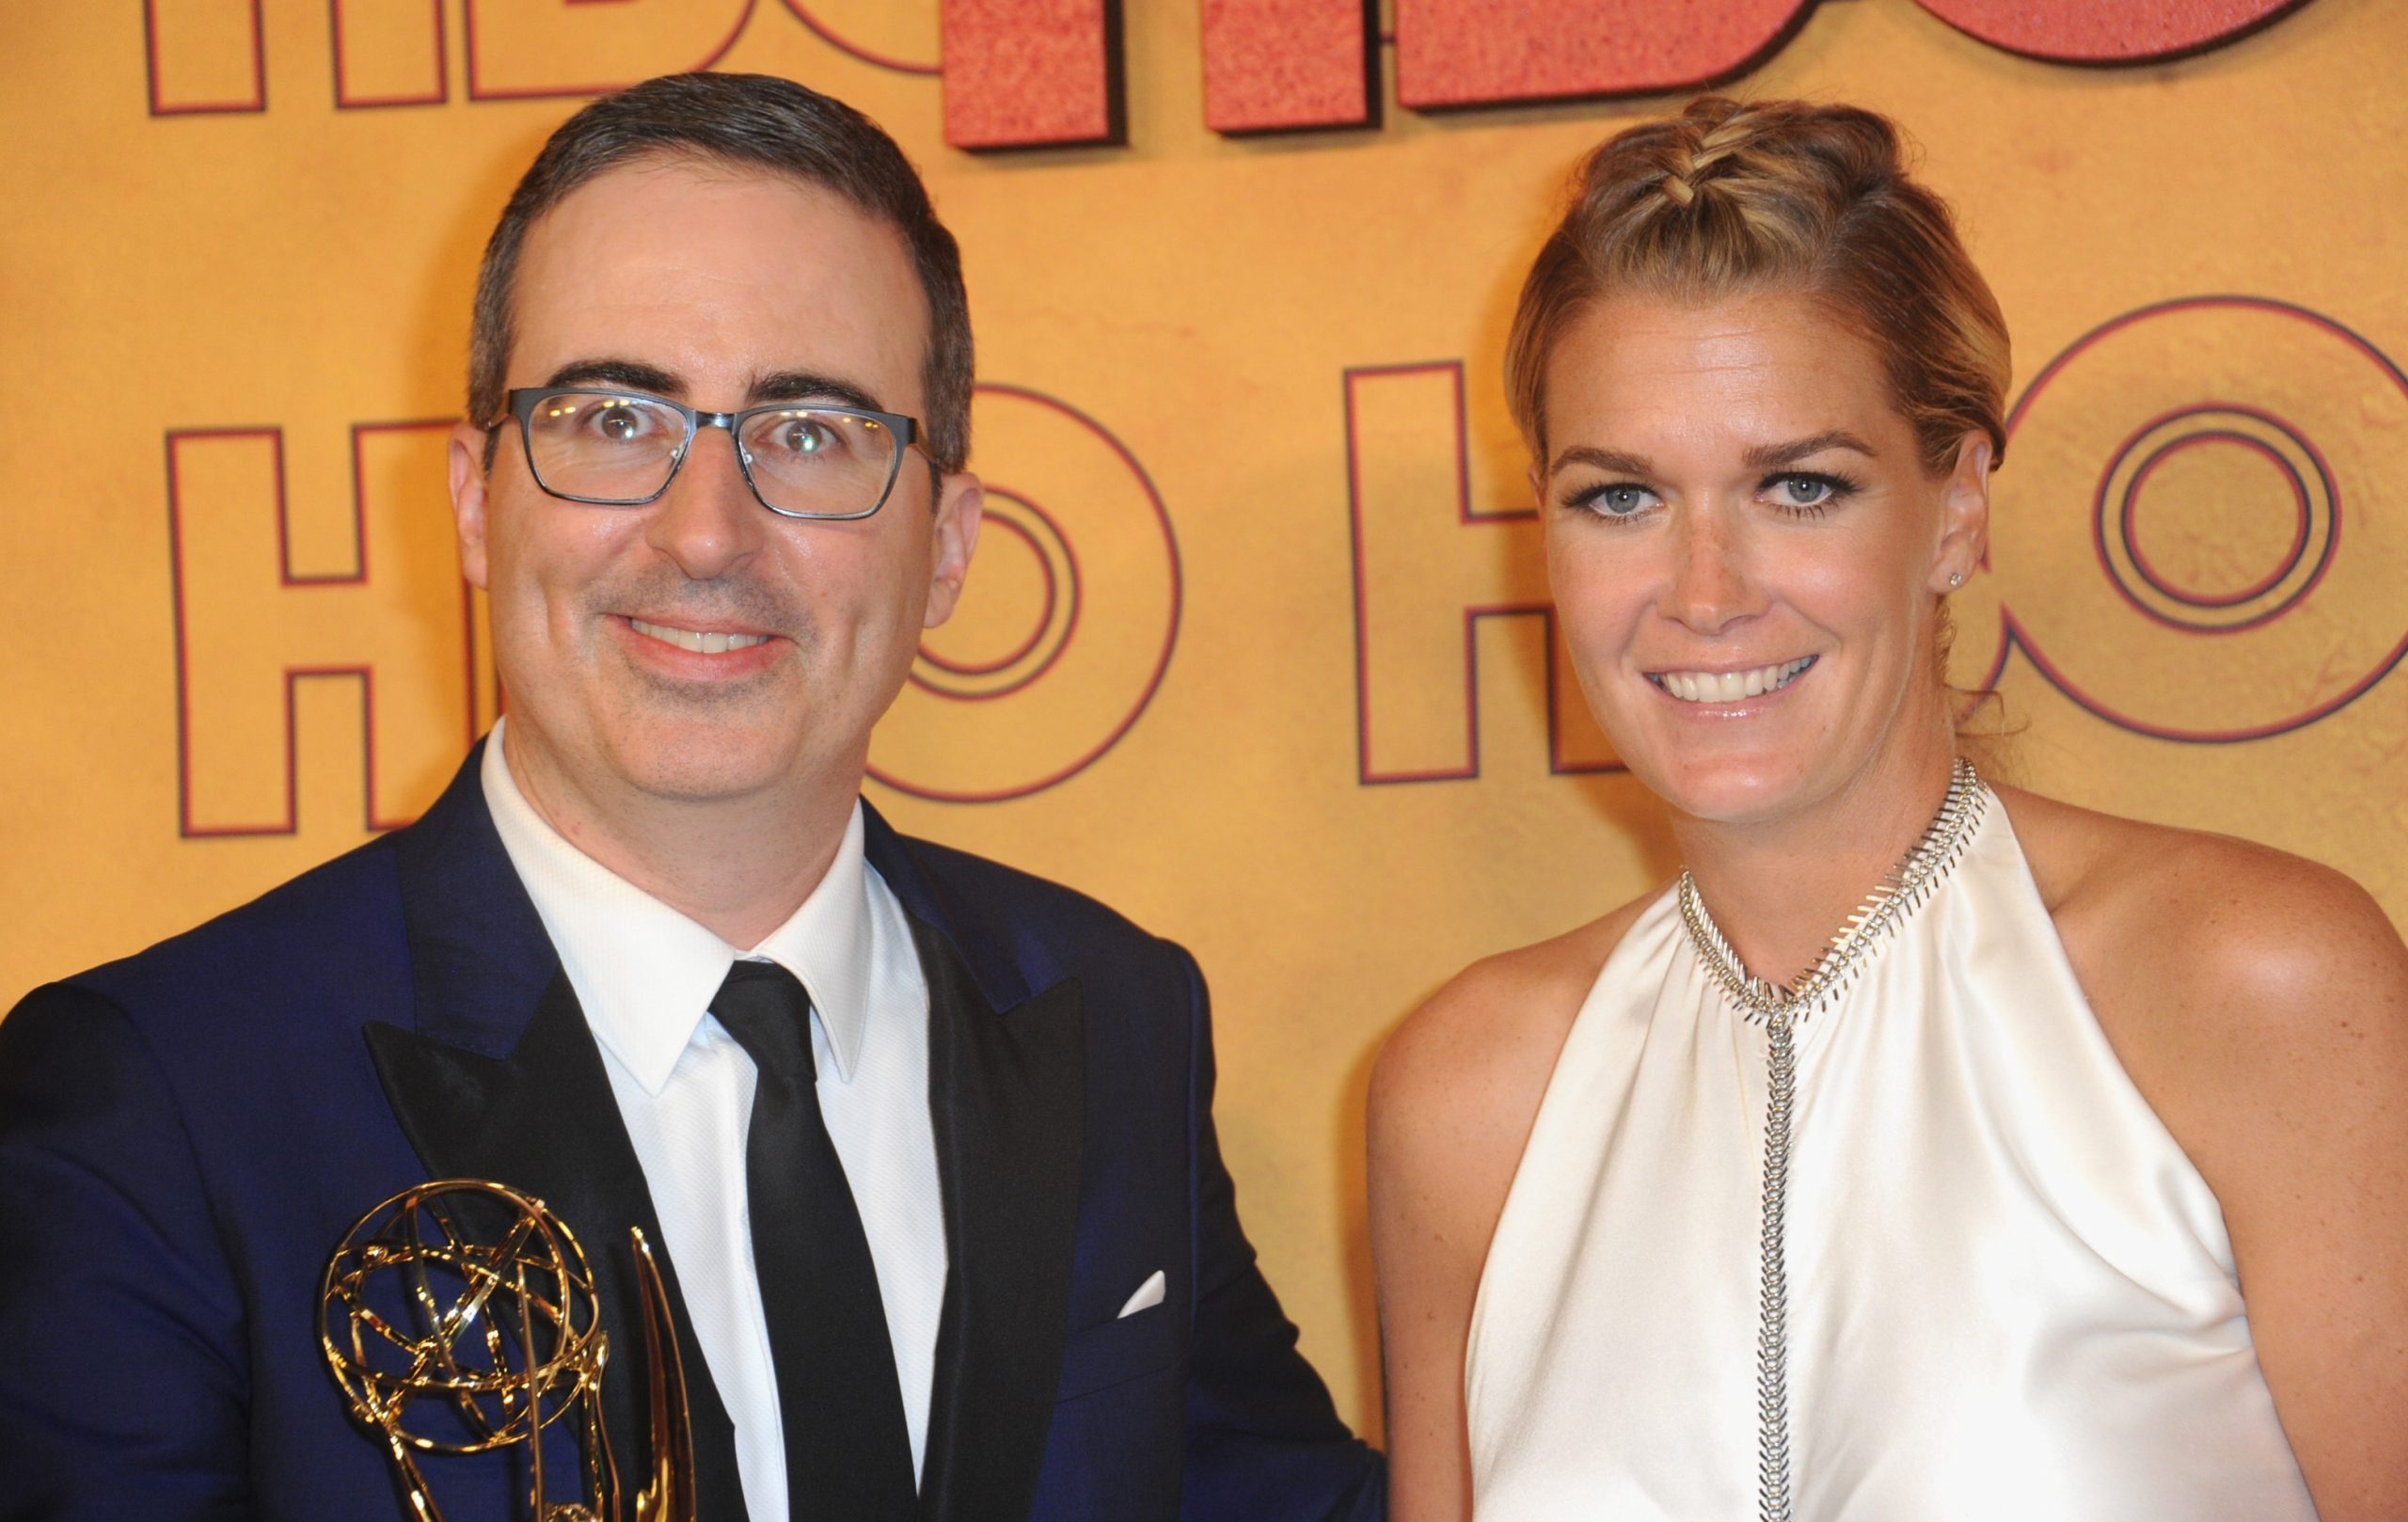 Who Is John Oliver’s Wife? Everything to Know About Kate Norley